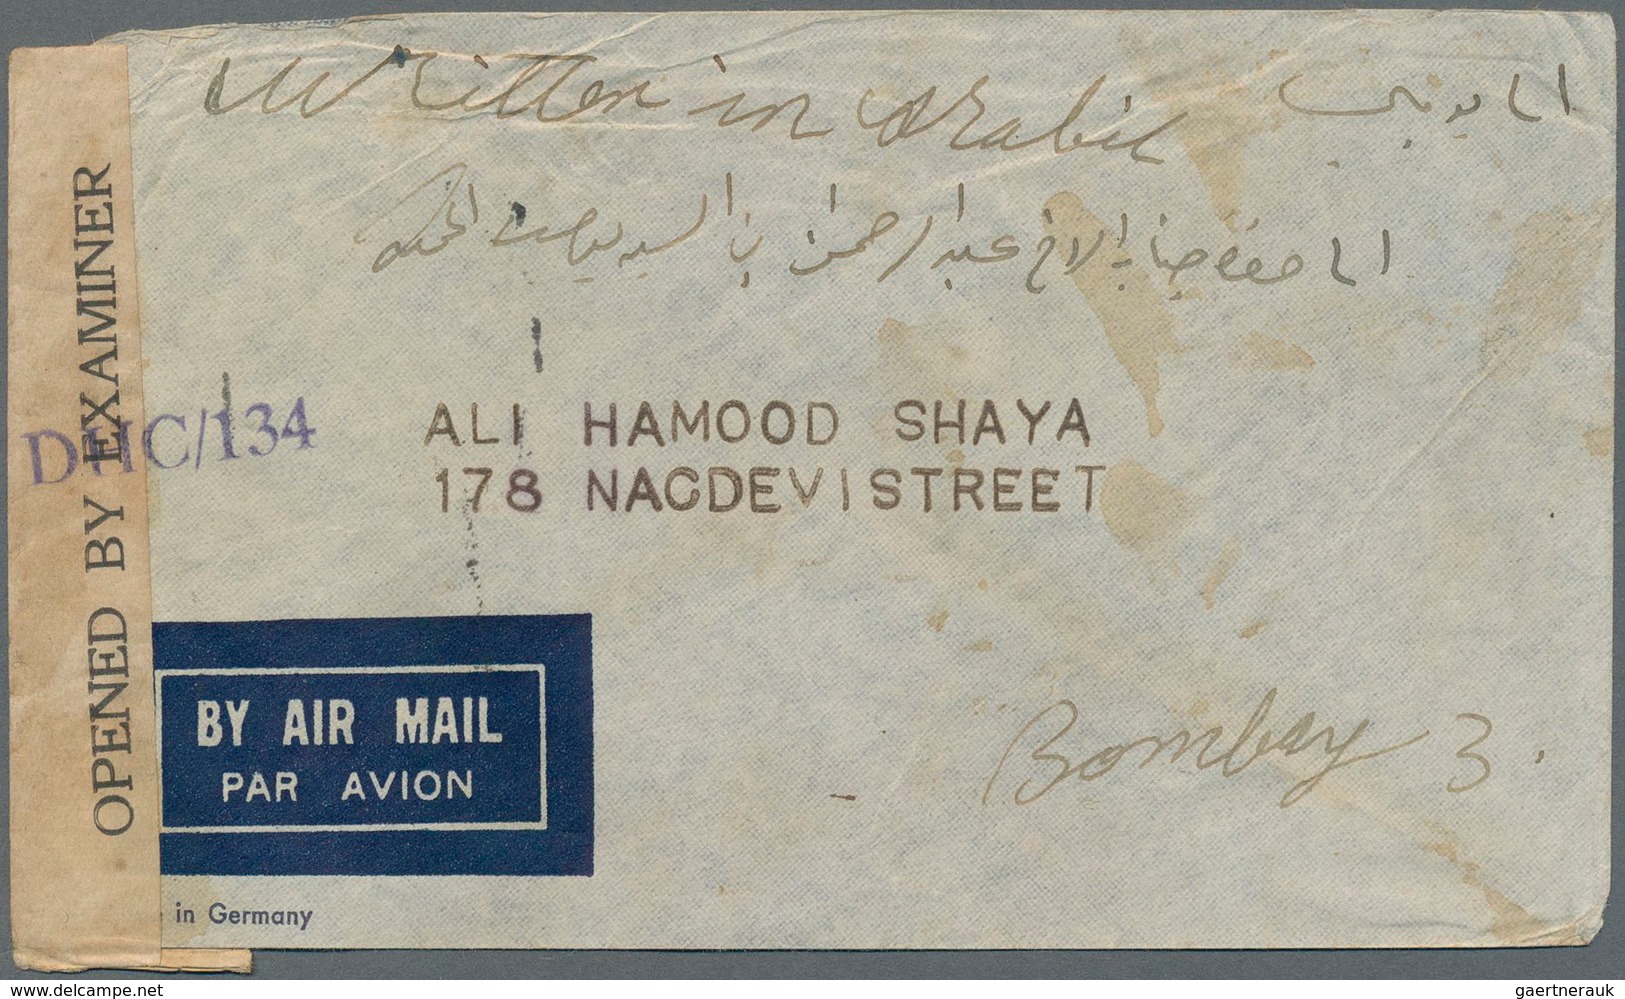 Kuwait: 1943 Cover (faults) From Kuwait To Bombay Franked On The Reverse By Five Singles Of India KG - Koeweit